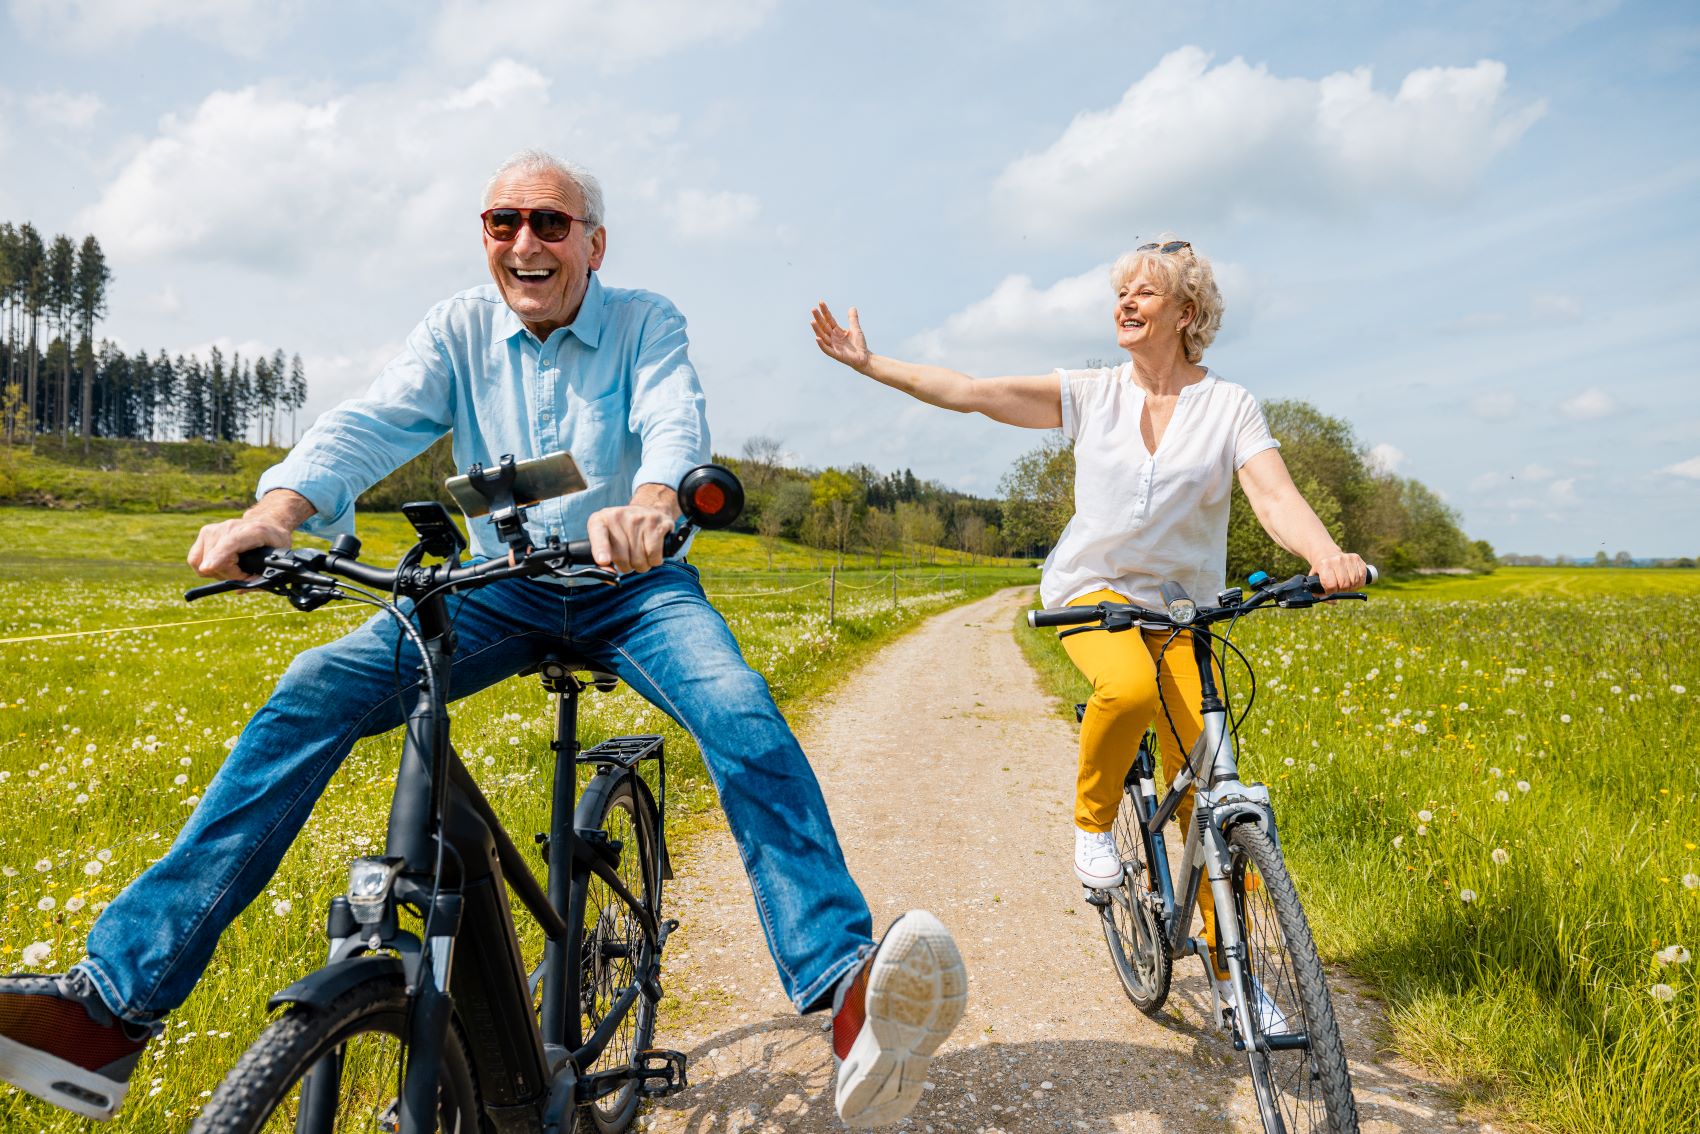 Jubilant man and woman on bicycles on rural gravel